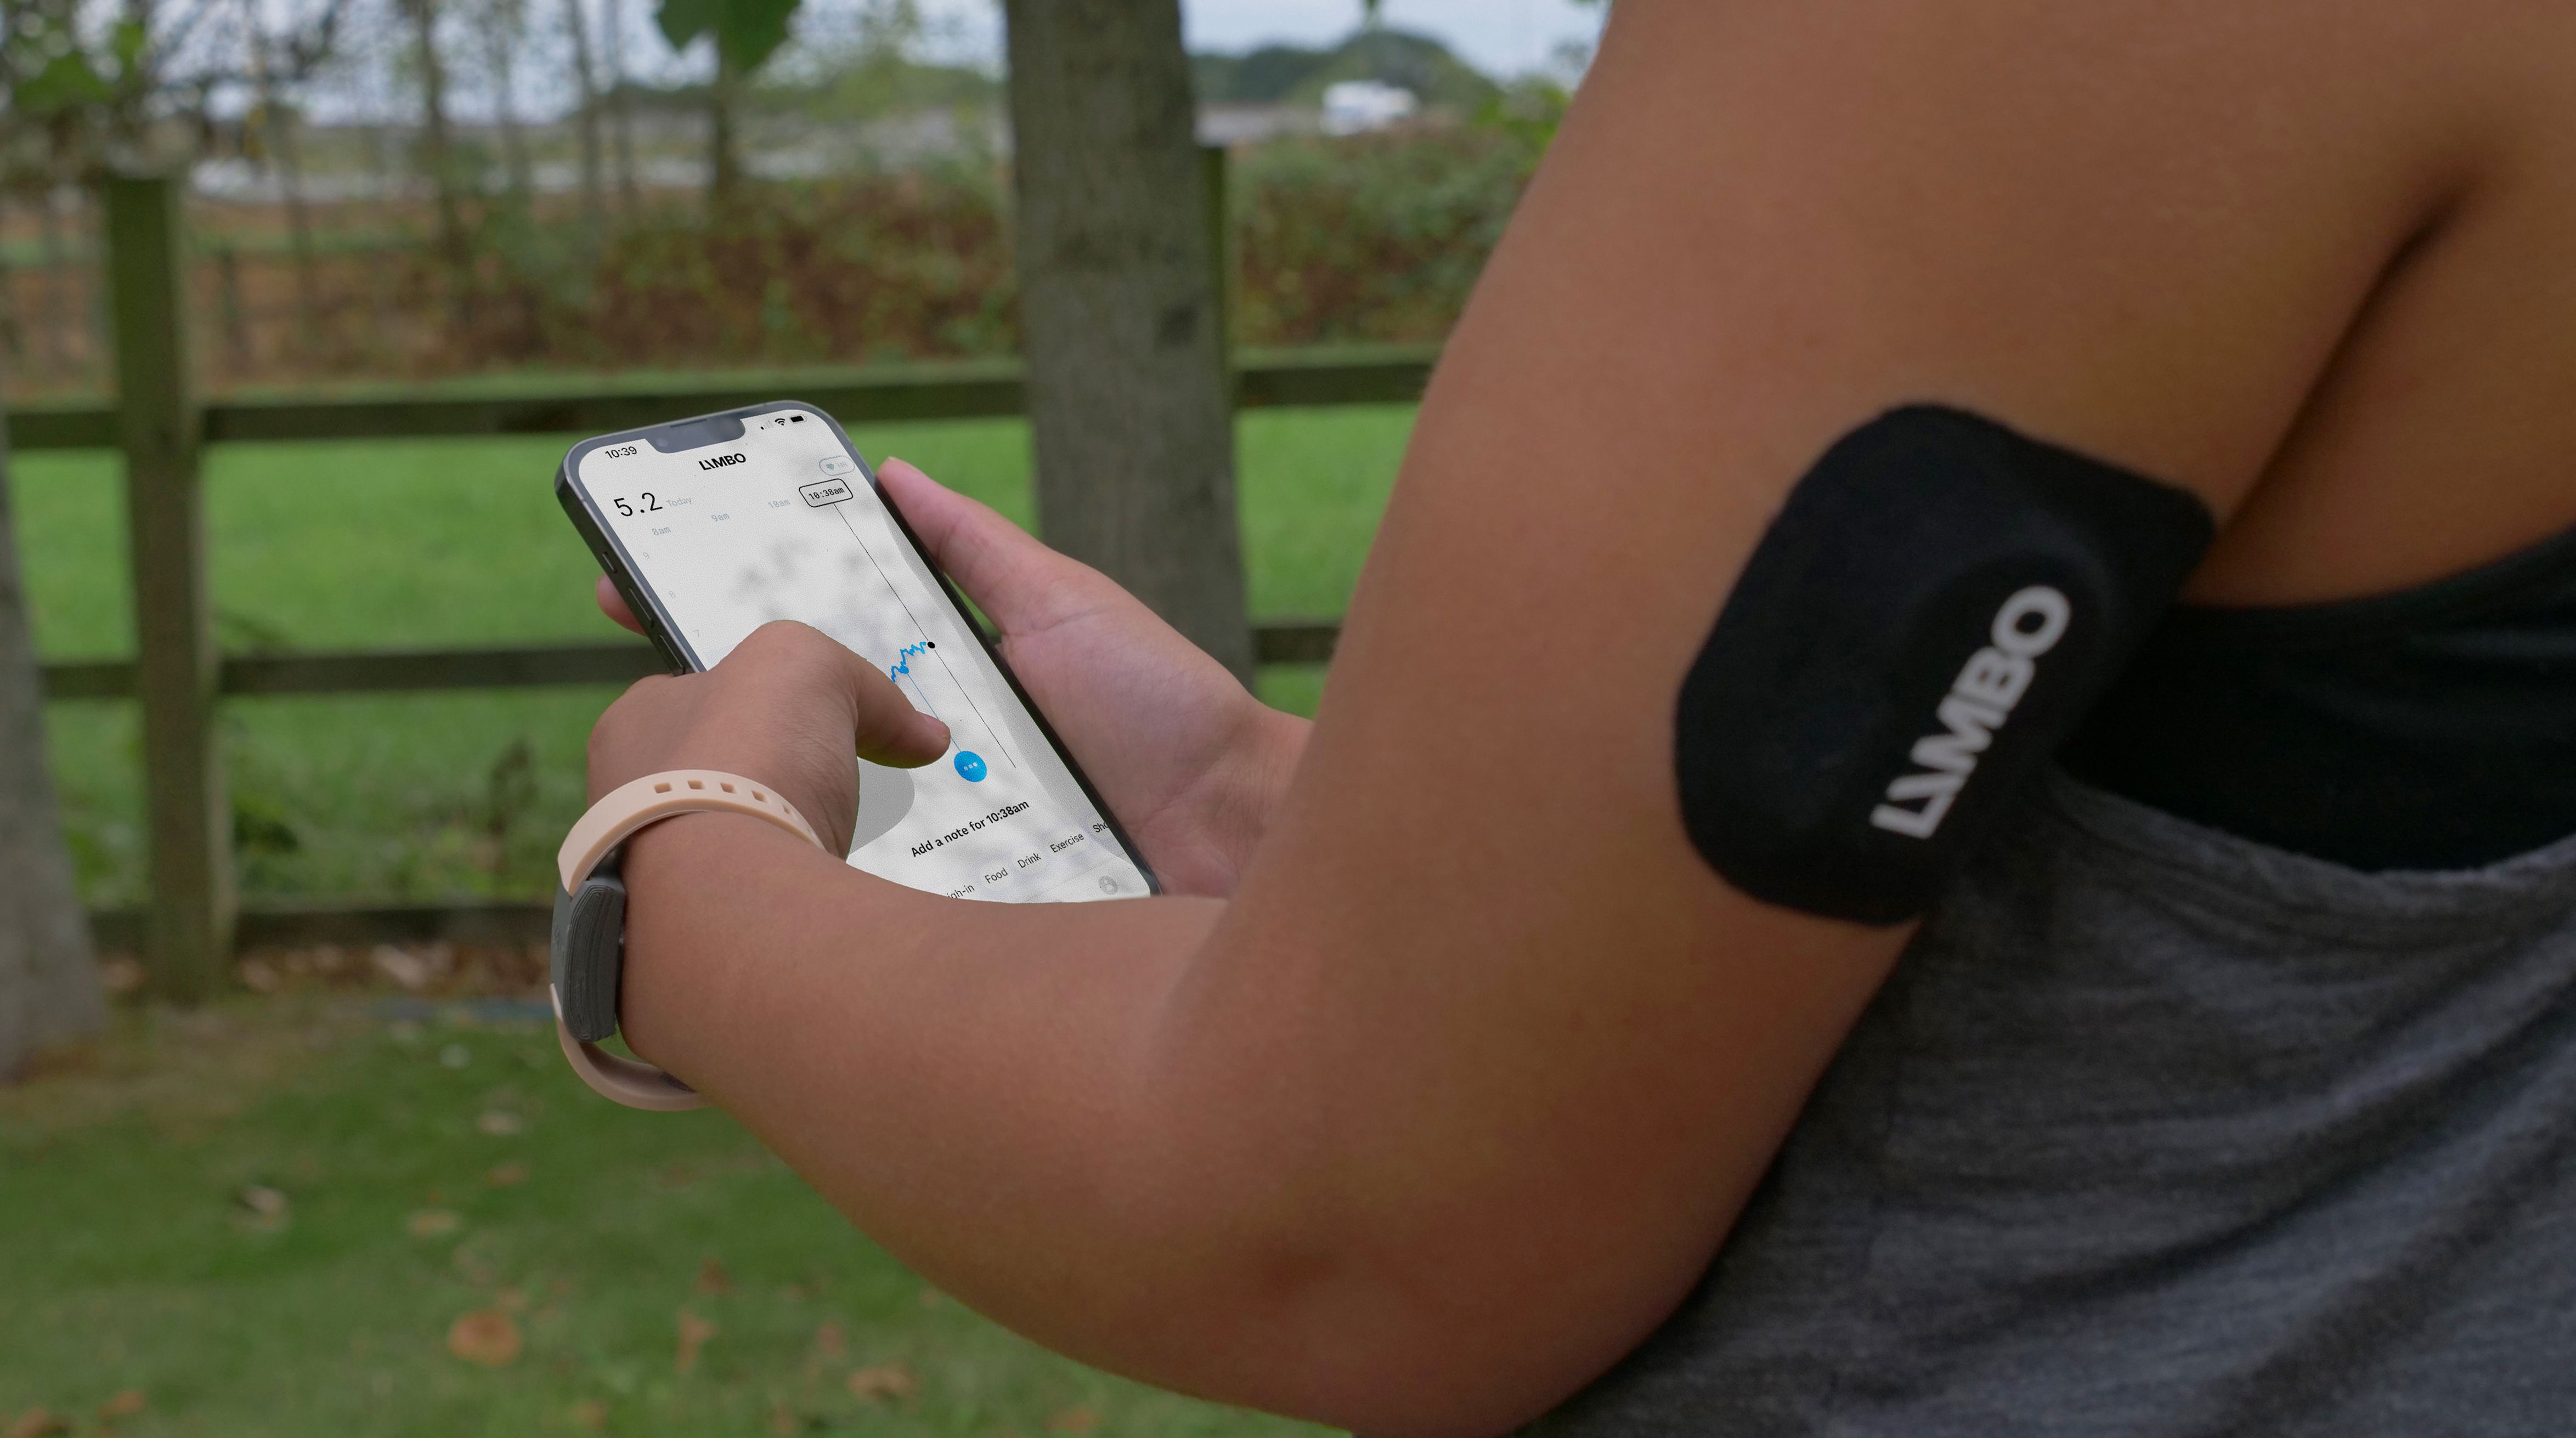 Limbo is tackling obesity with a pair of wearables and decades of physiology thumbnail